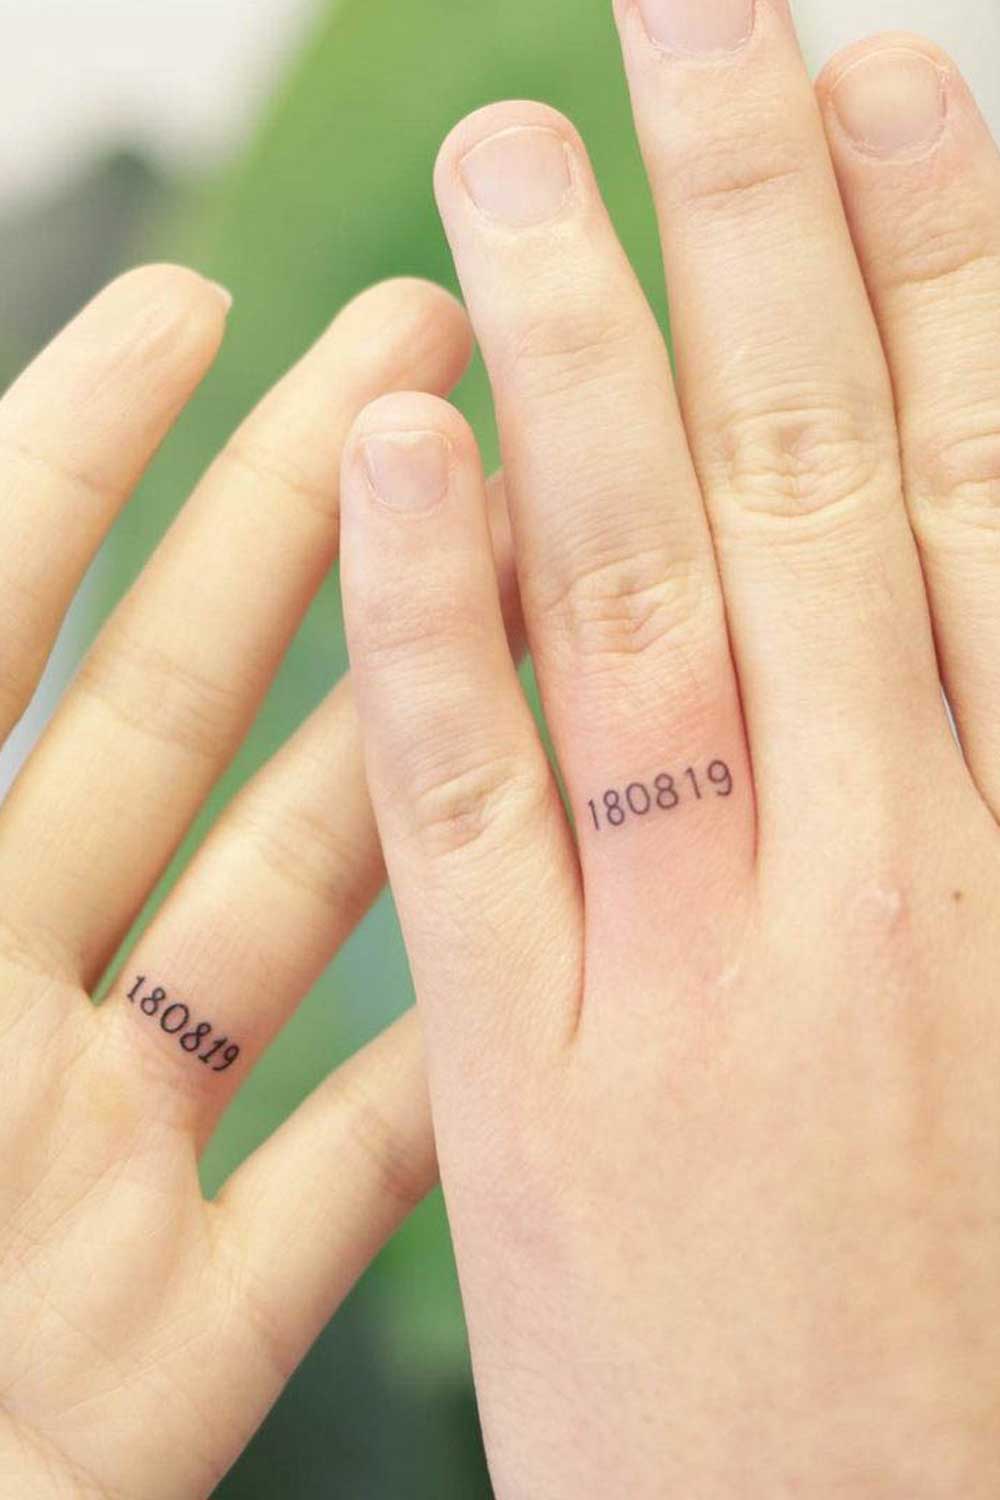 Finger Tattoos with Dates